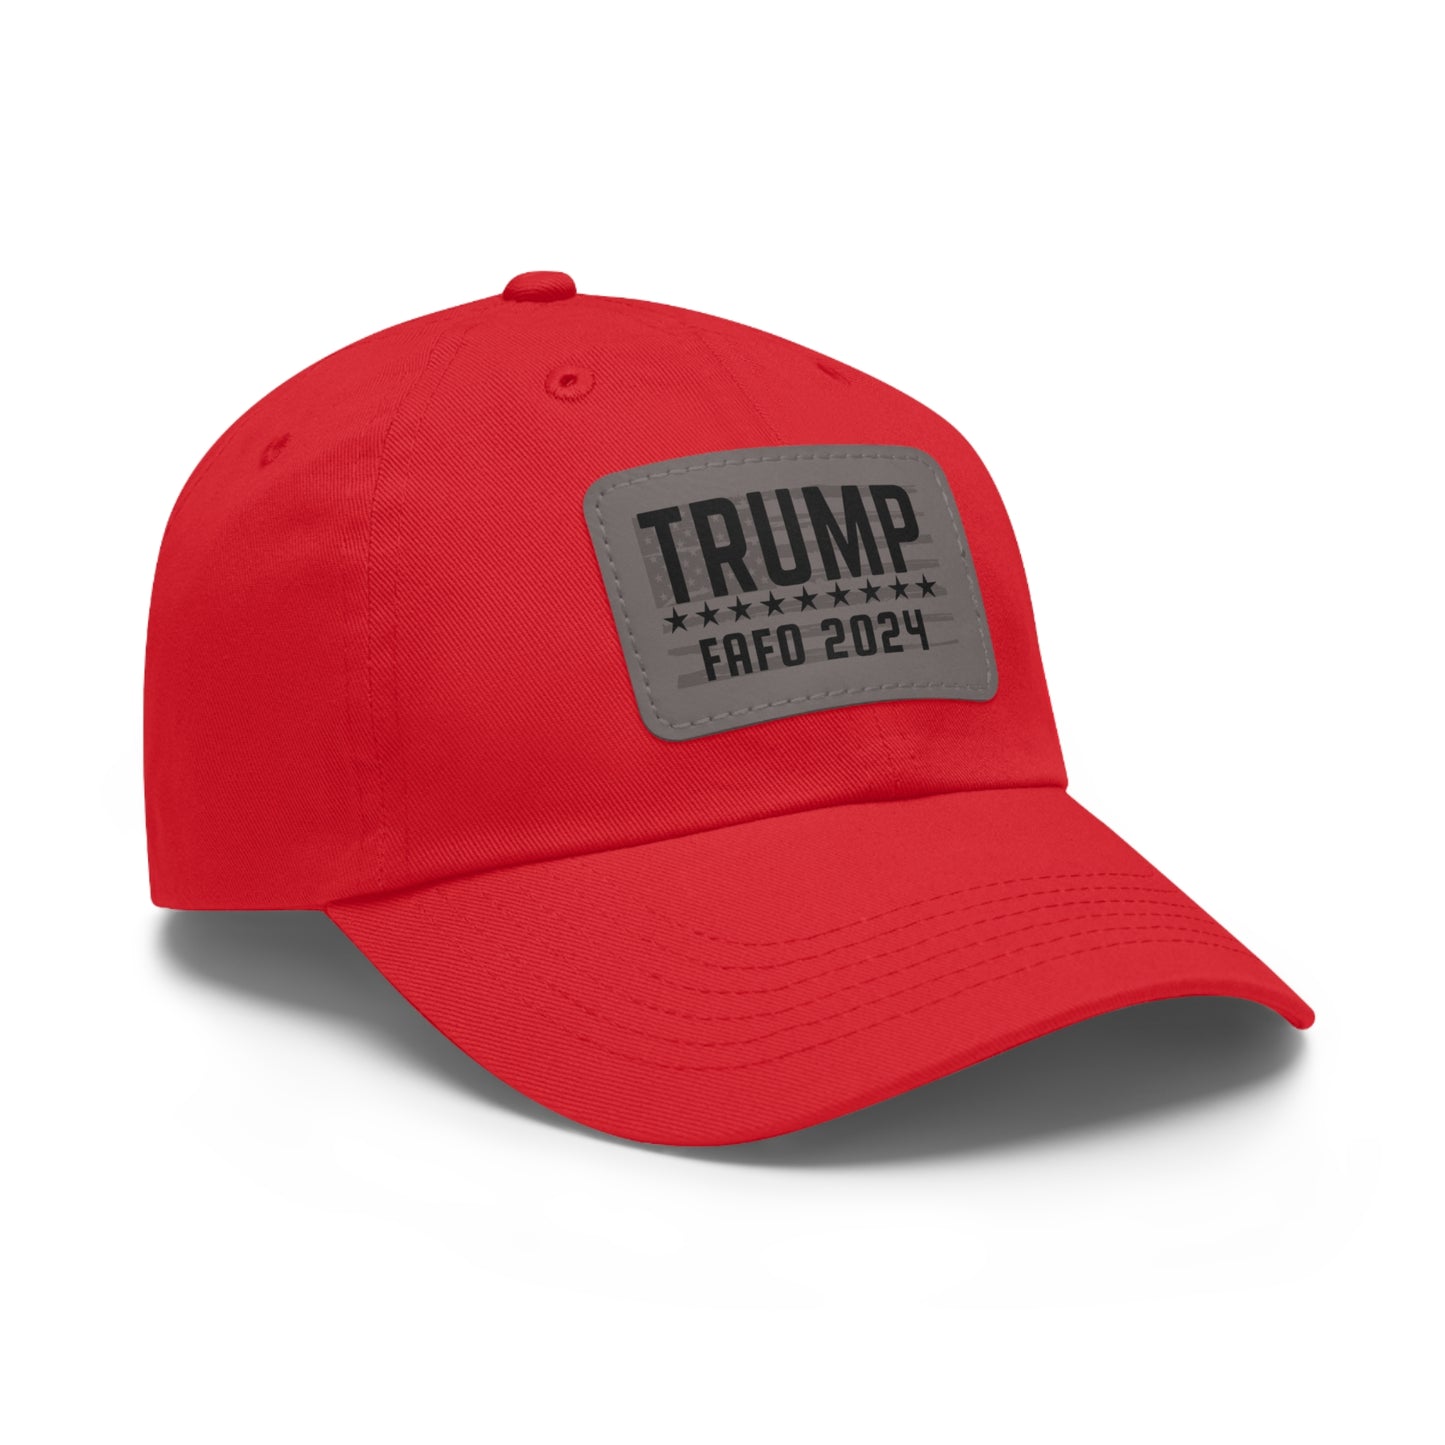 TRUMP FAFO ‘24 Leather Patch Hat